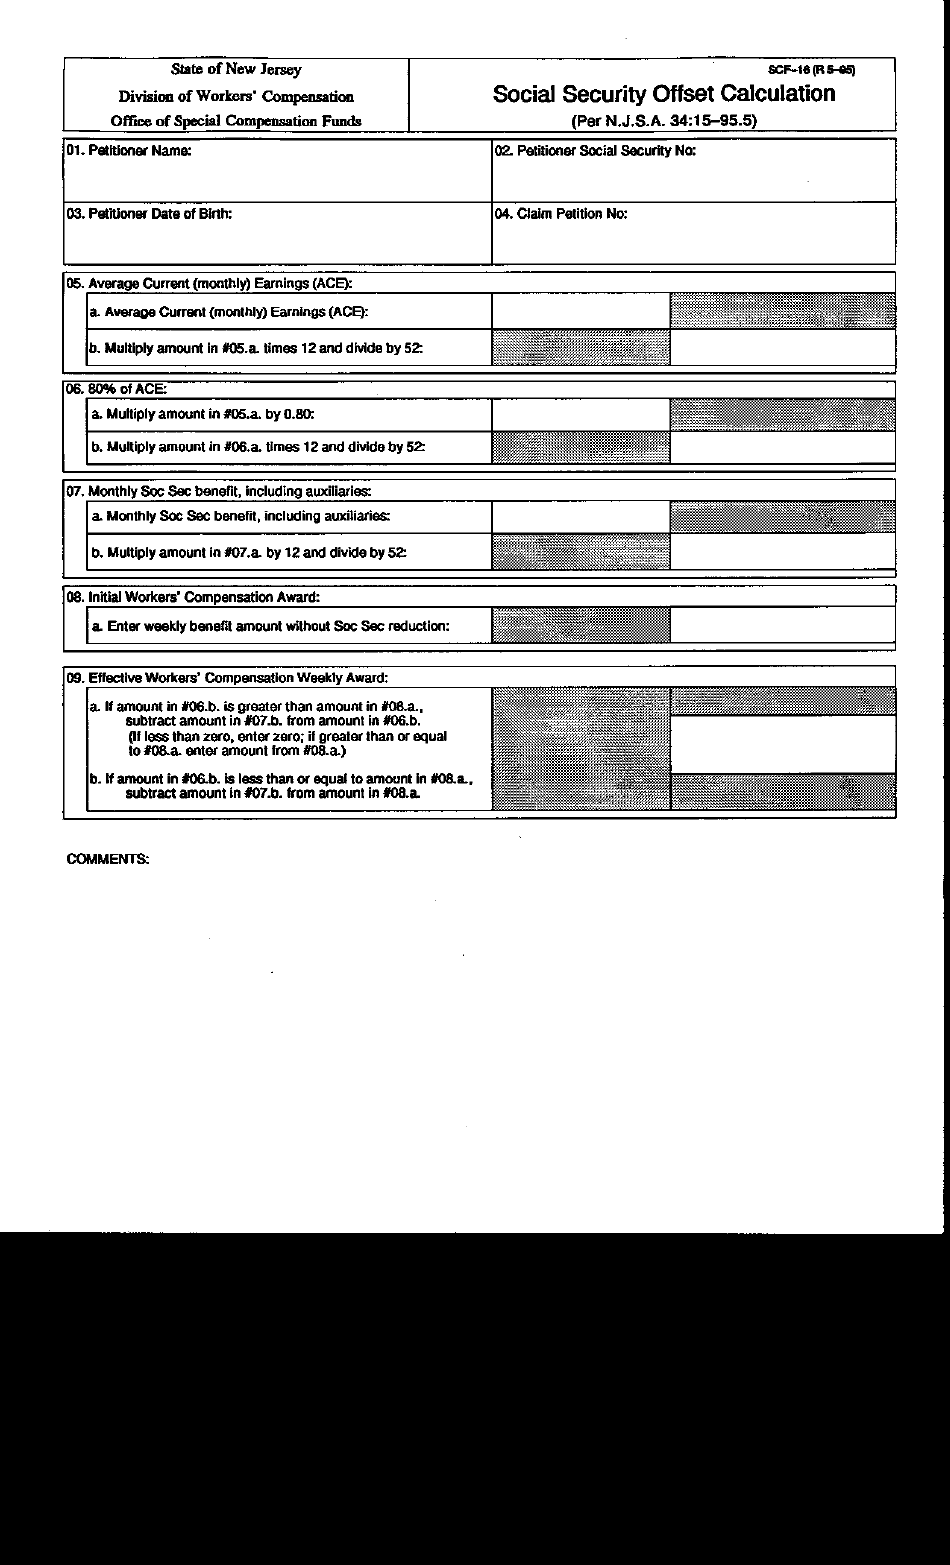 Form SCF-16 Social Security Offset Calculation - New Jersey, Page 1